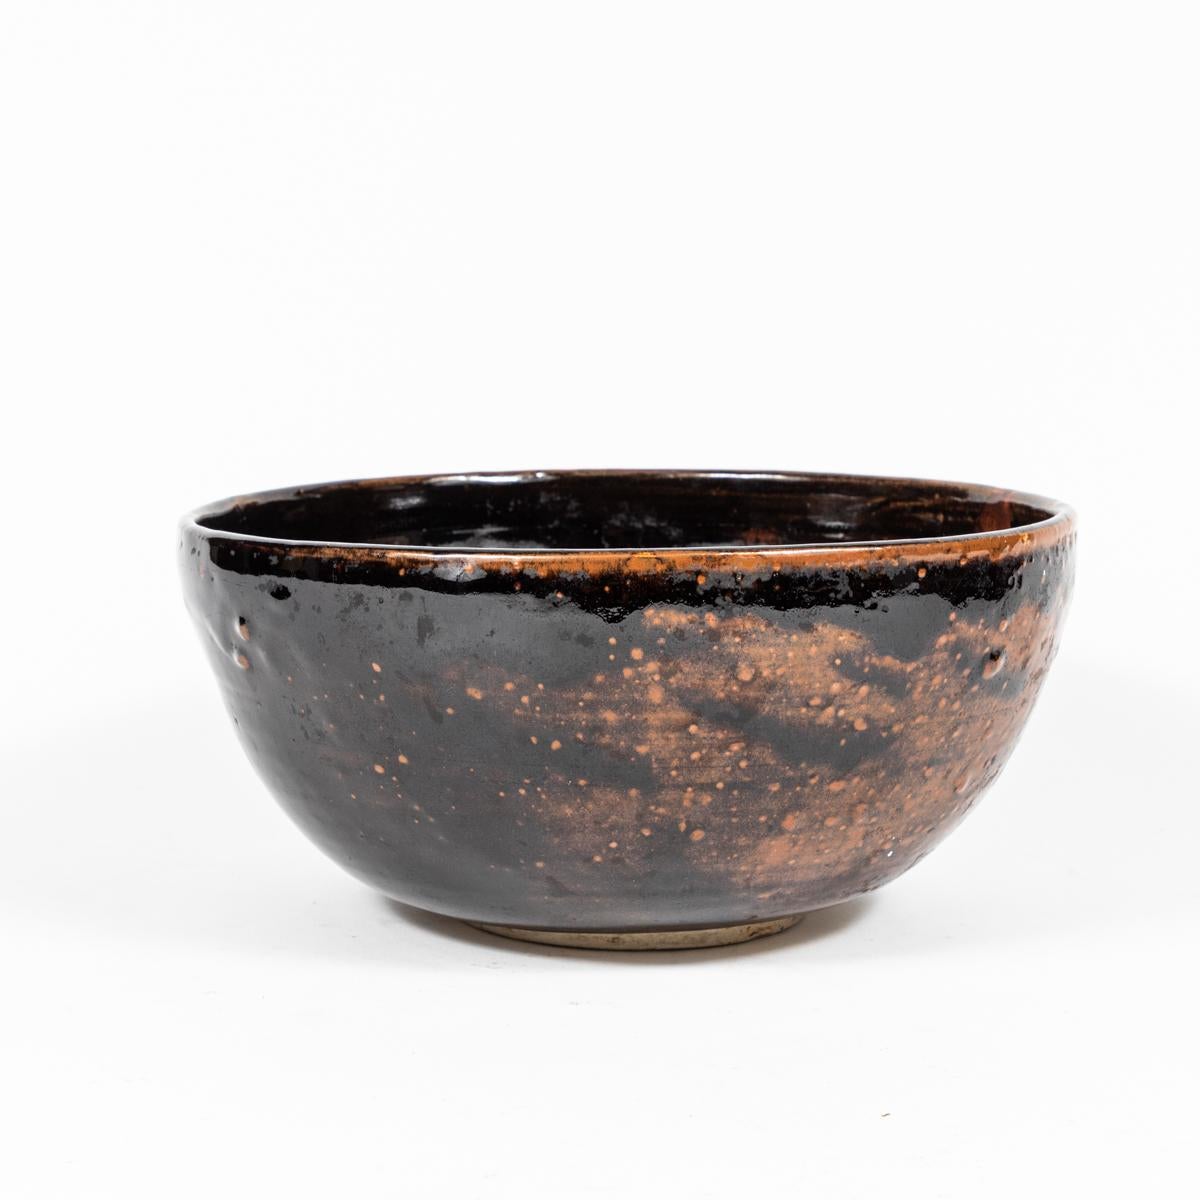 English mid-century studio pottery bowl. Notable for its unique glazing pattern of deep inky browns and rusty golden neutrals, the semi-smeared drip pattern that has formed on both its interior and exterior has a flowing and relaxed, wabi-sabi